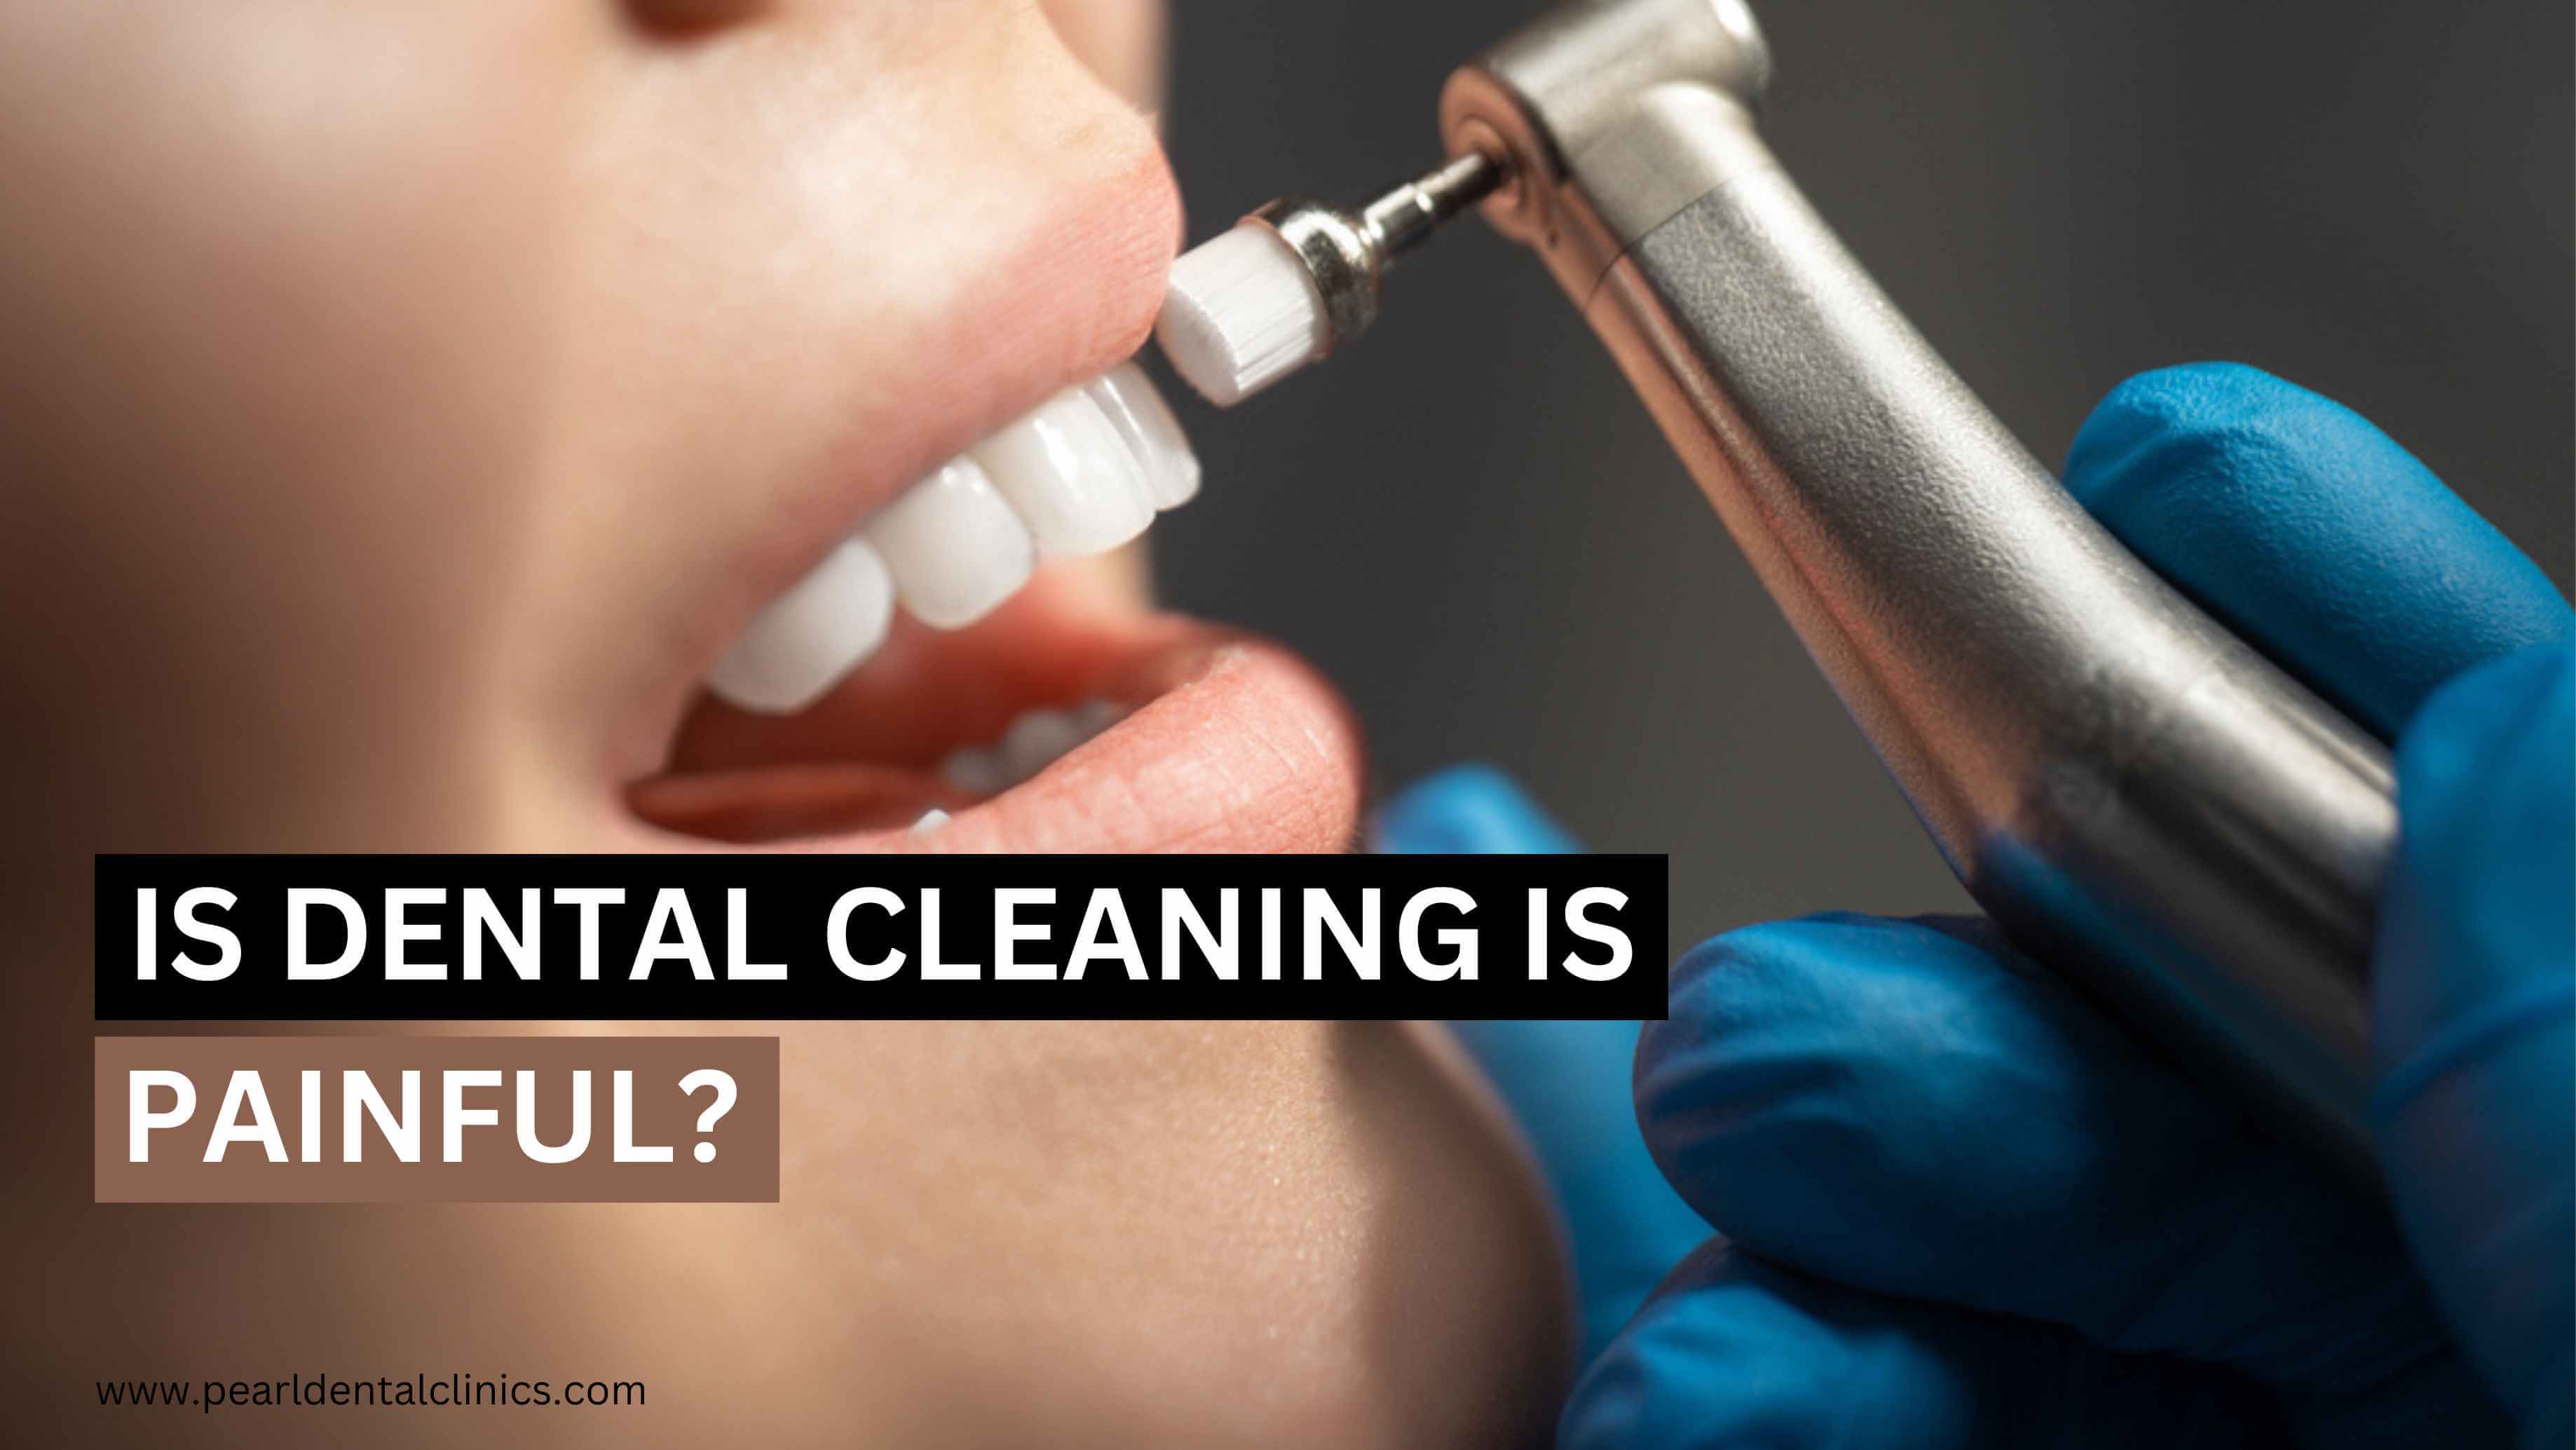 DOES DENTAL CLEANING HURT?